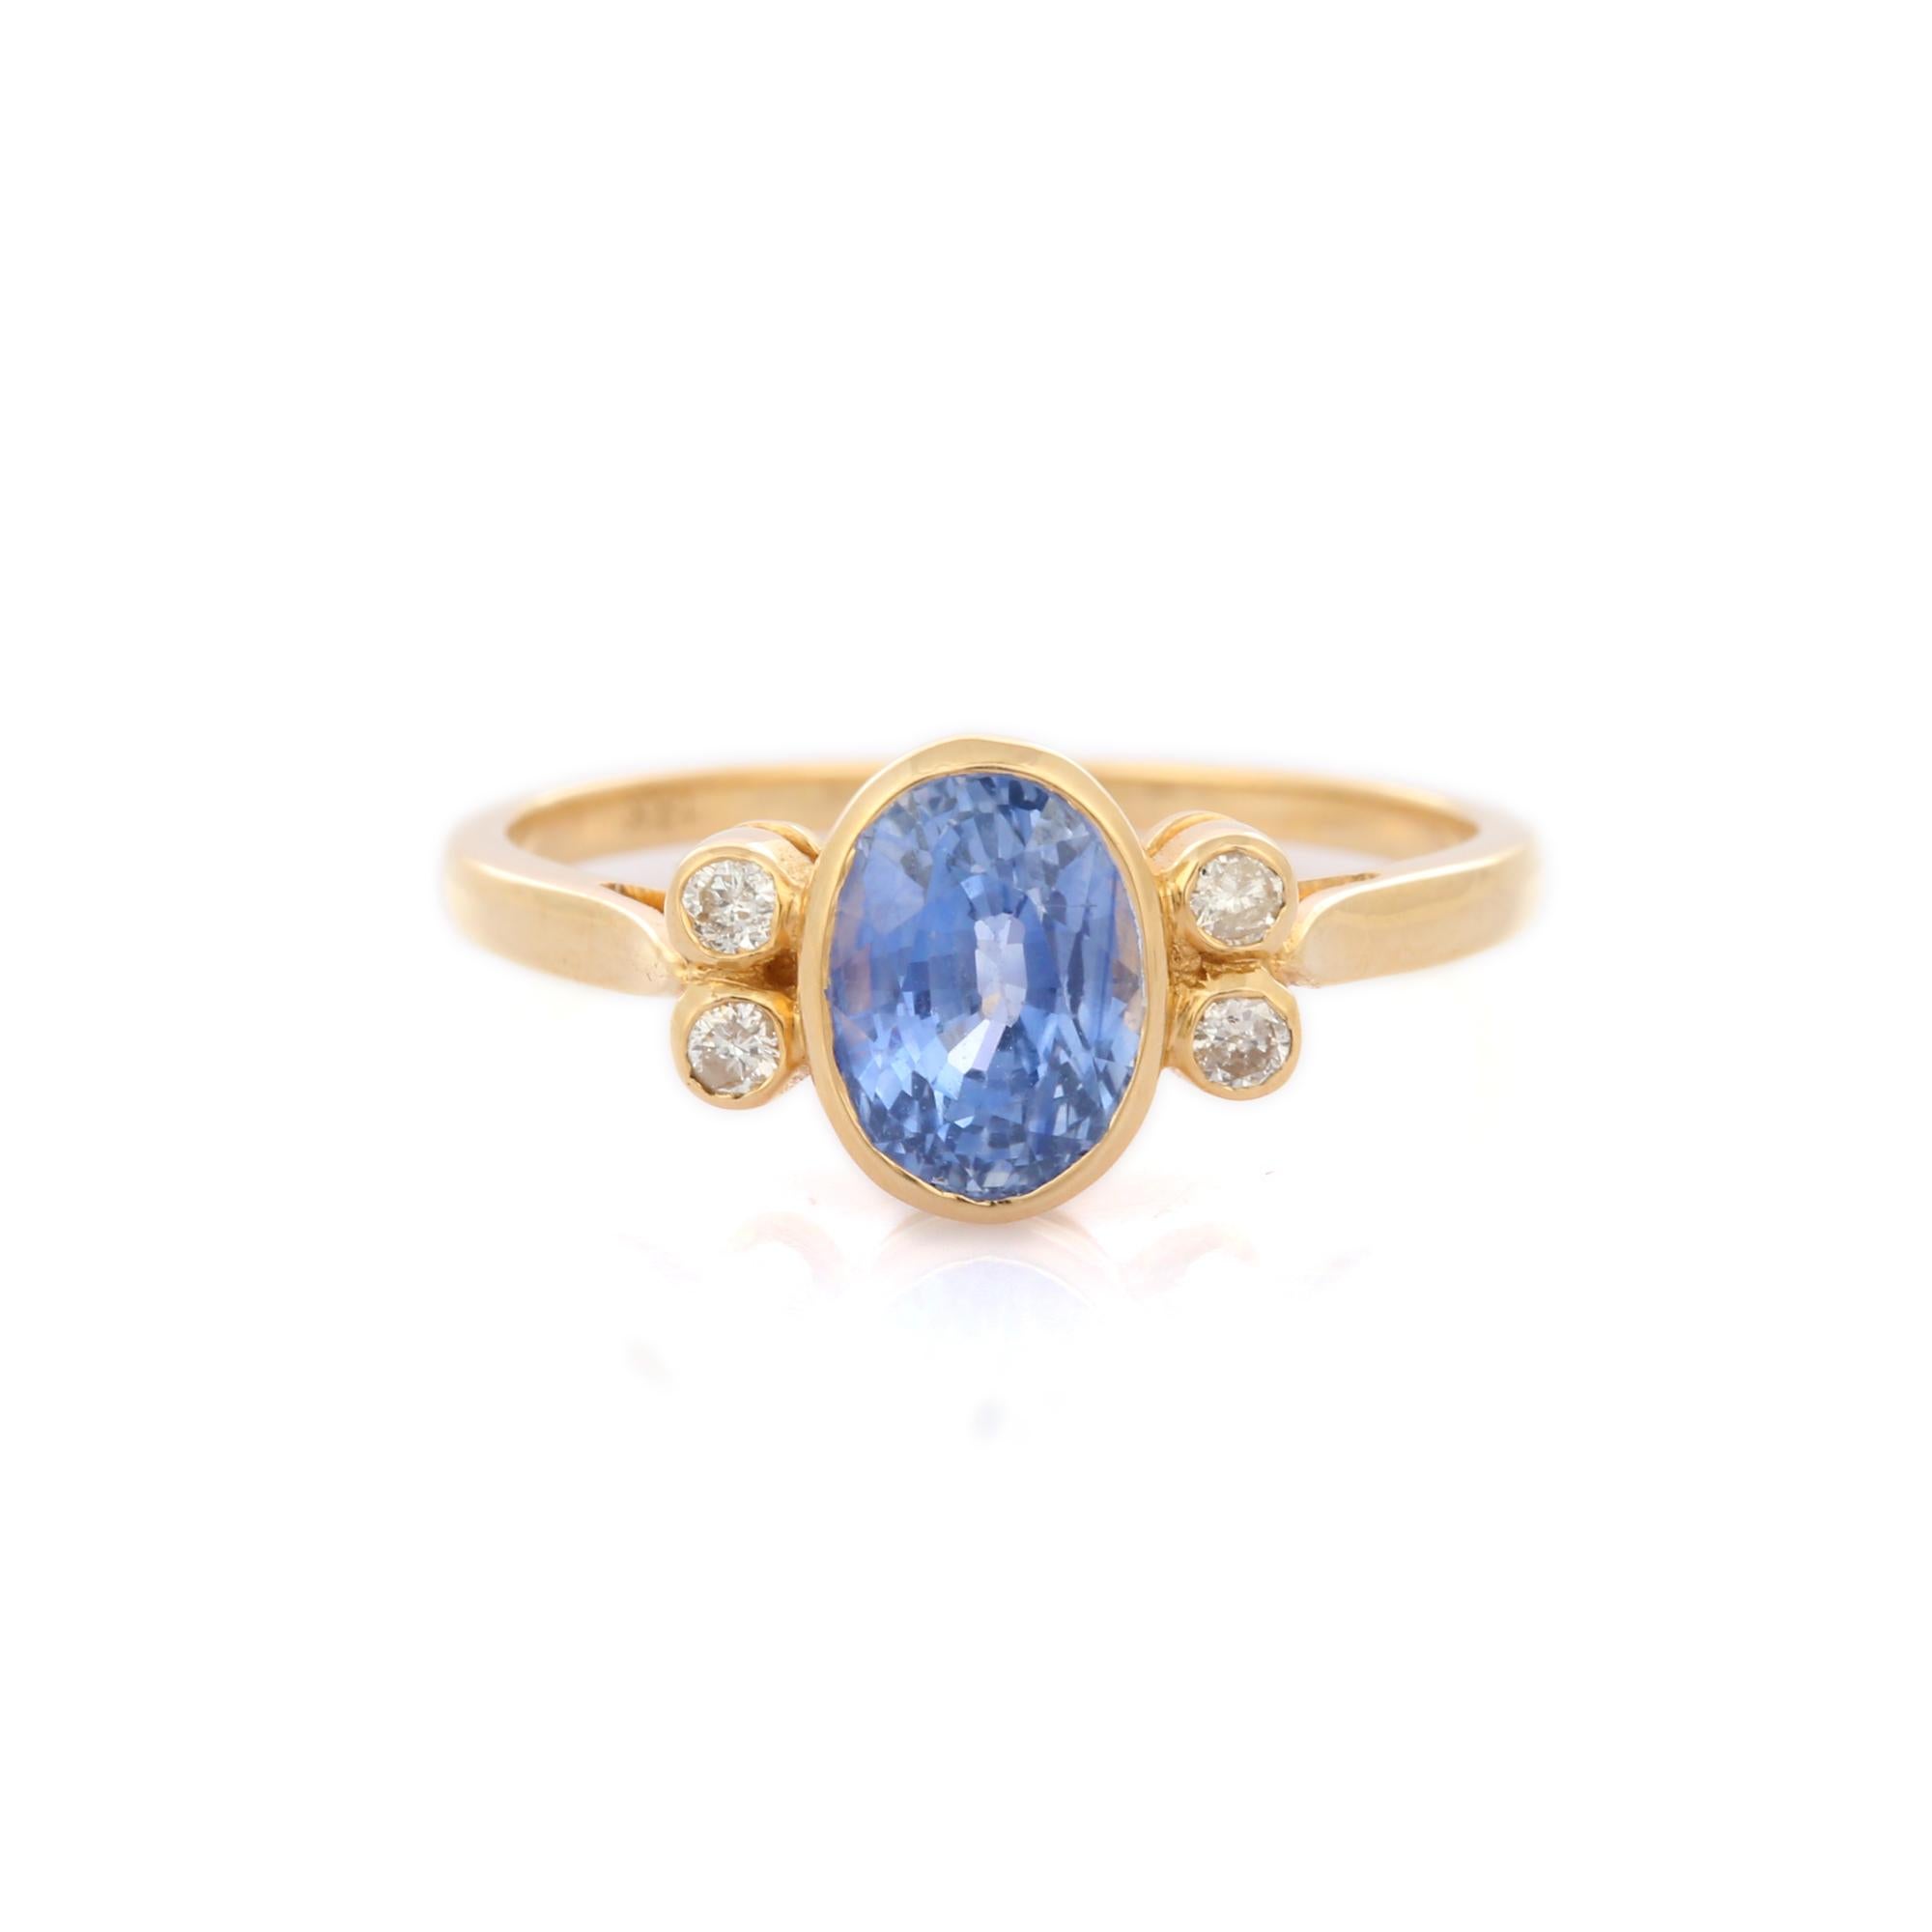 For Sale:  Blue Sapphire and Diamond Wedding Ring in 18K Yellow Gold 2